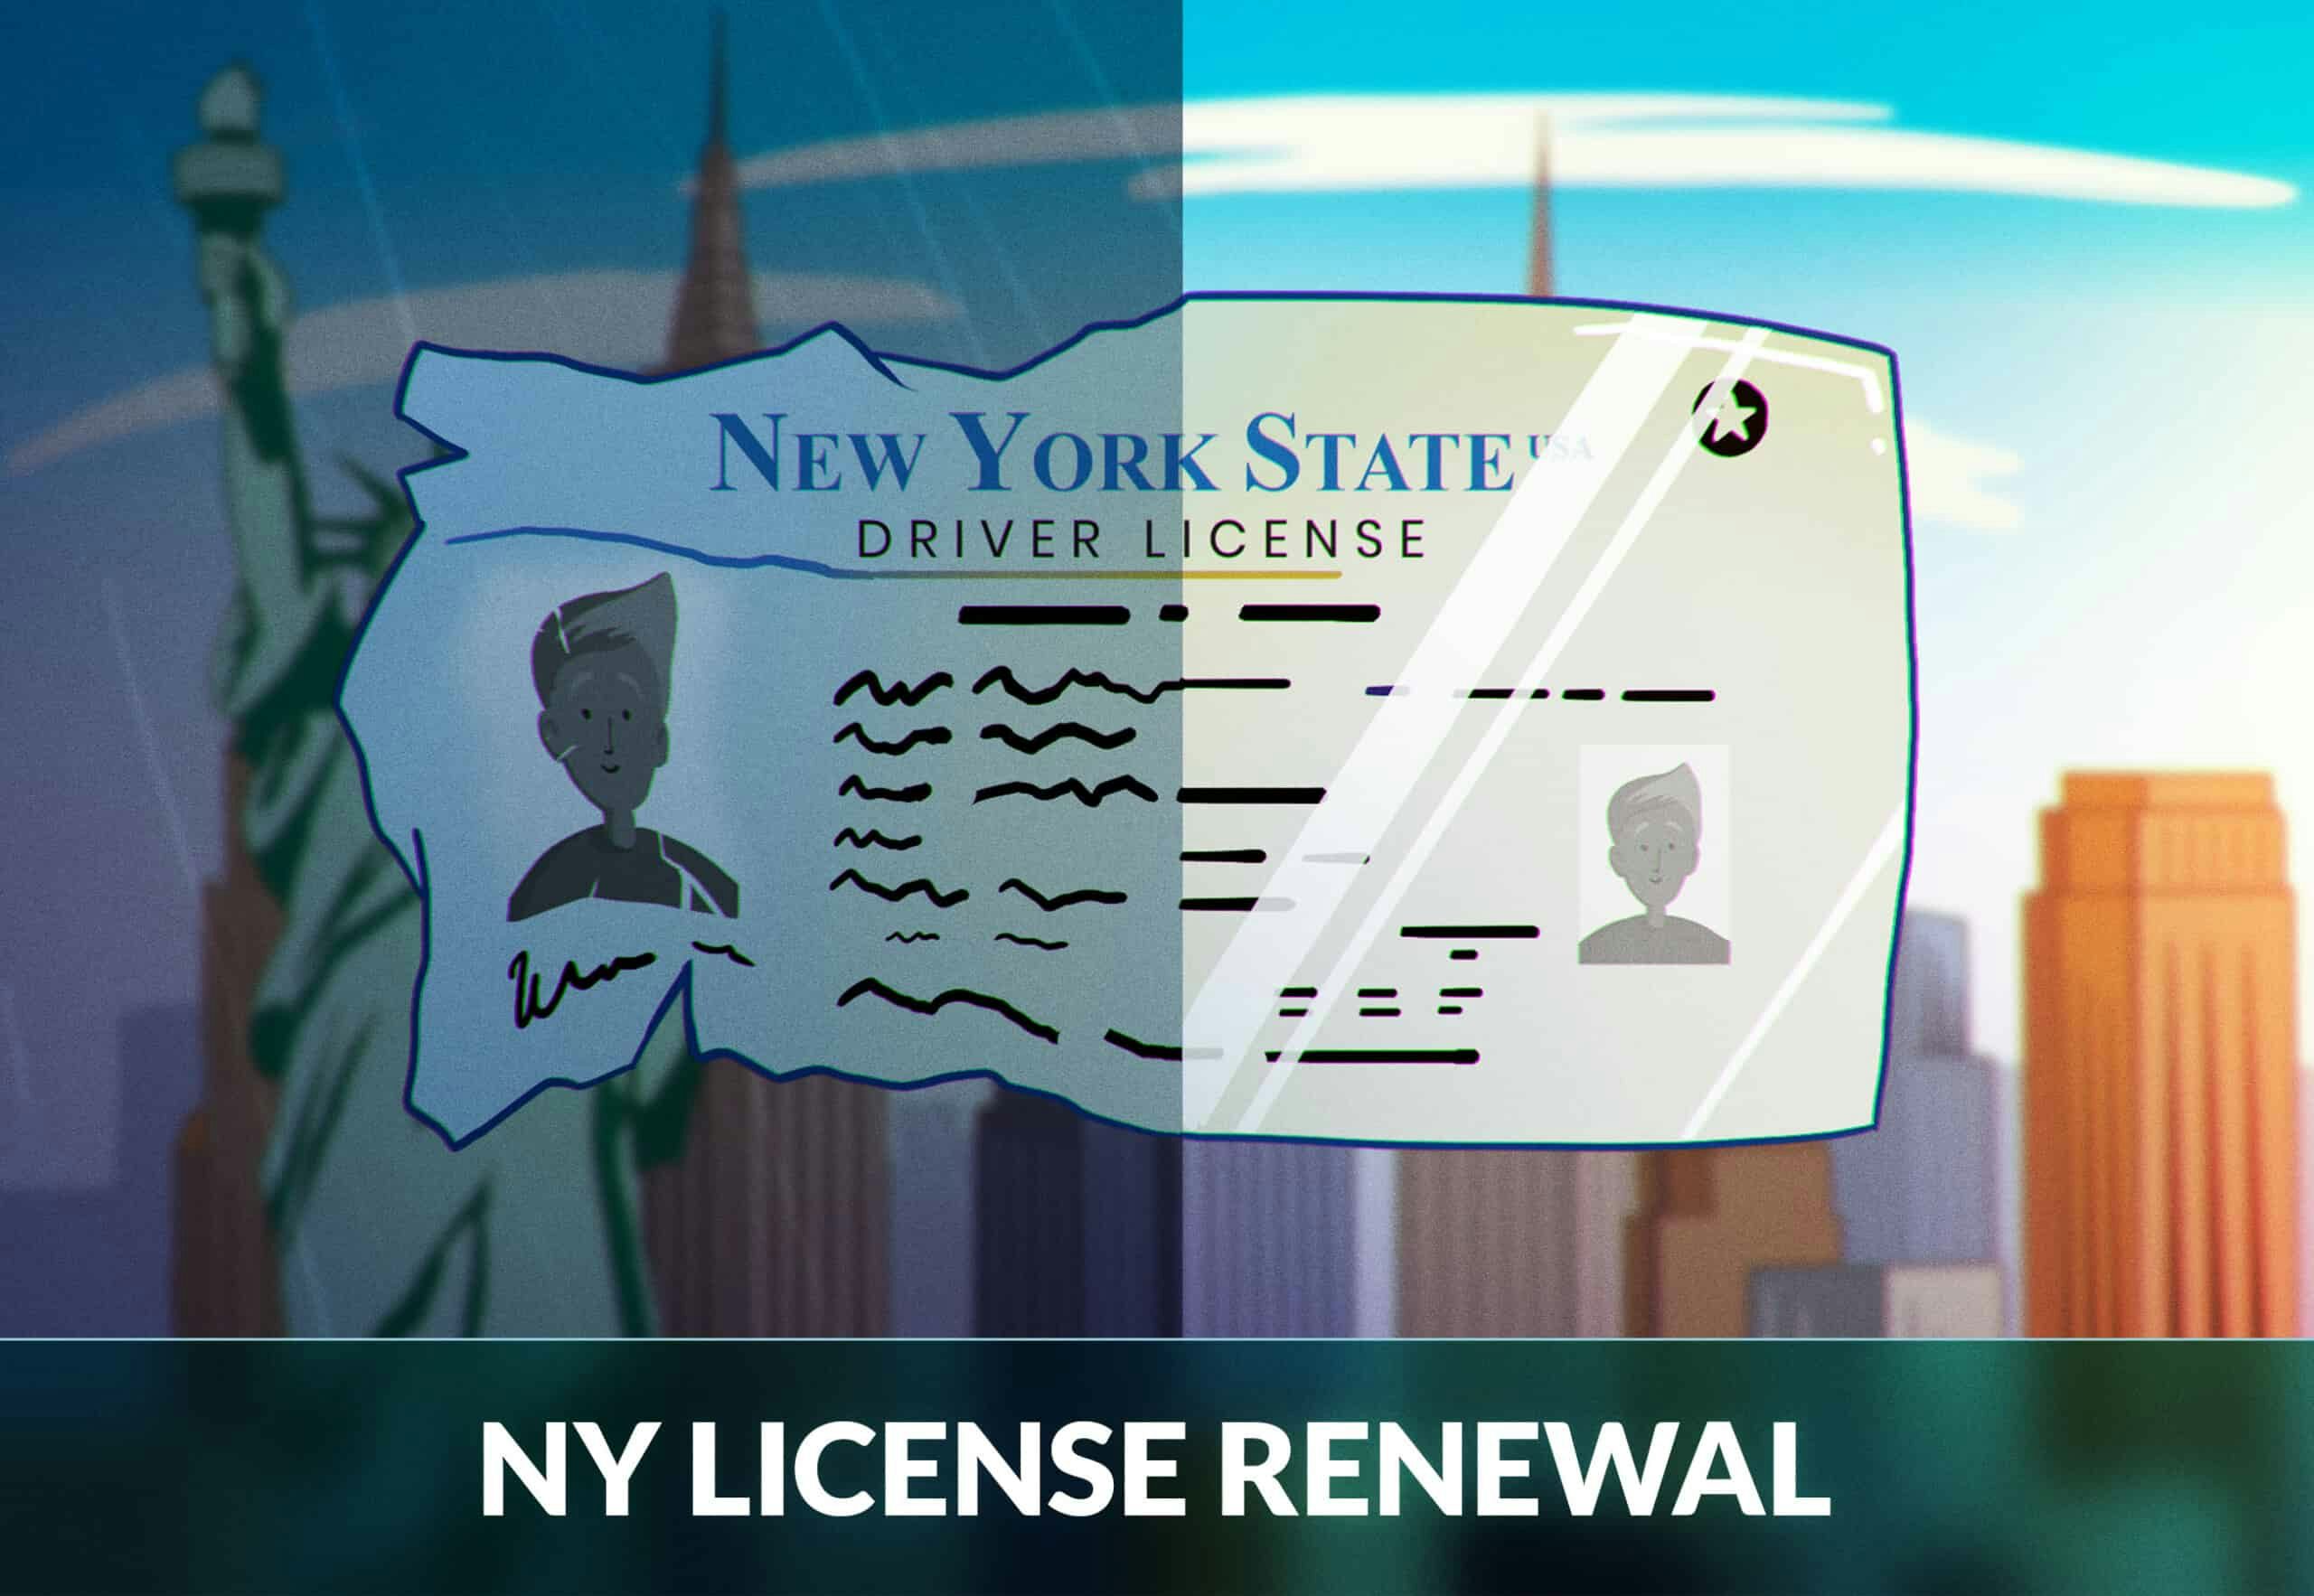 renew license ny what to bring